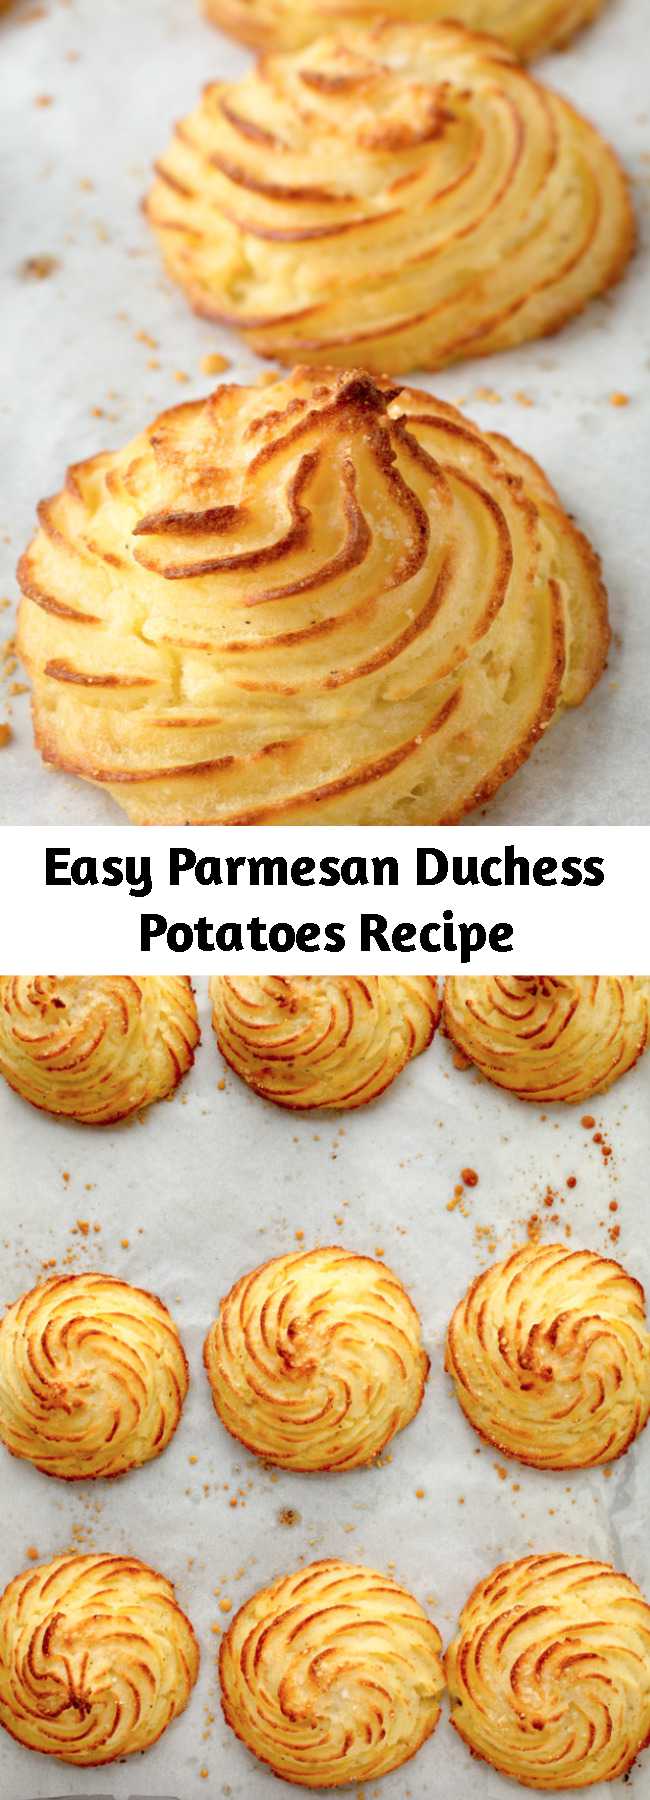 Easy Parmesan Duchess Potatoes Recipe - See how easy it is to elevate your mashed potatoes with this Duchess Potatoes recipe! These individually-piped potato puffs are a rich, elegant side dish for a special occasion dinner.